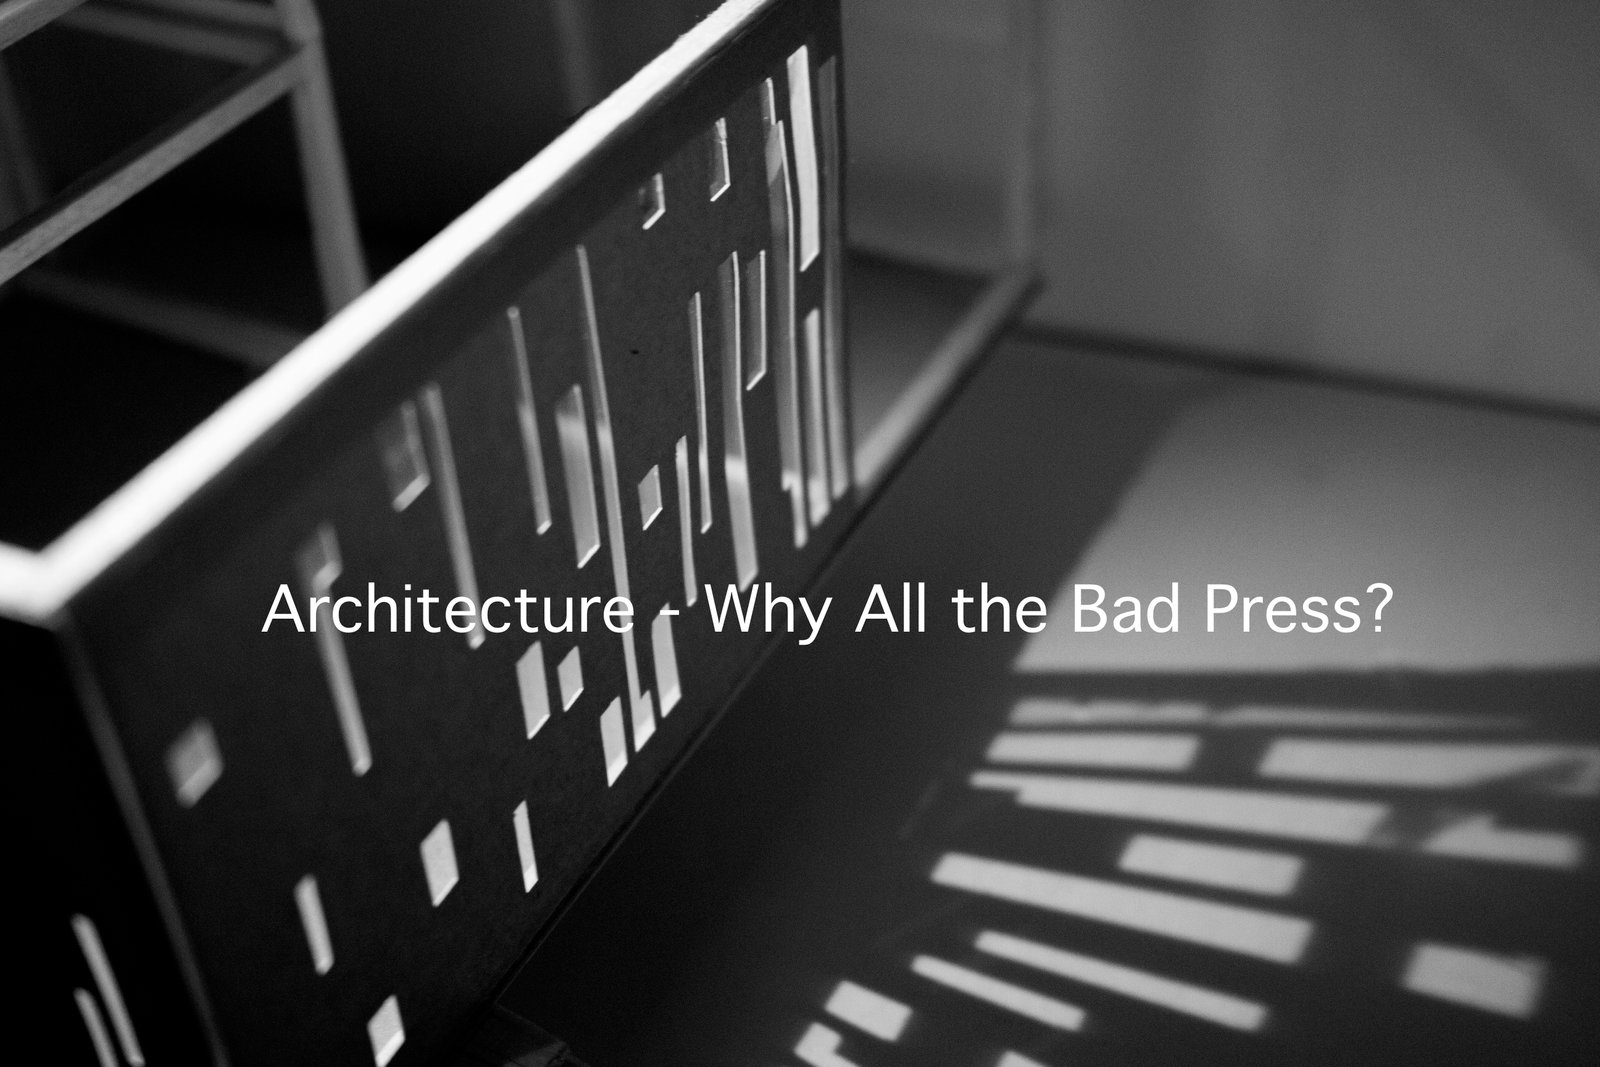 Architecture – Why All the Bad Press?